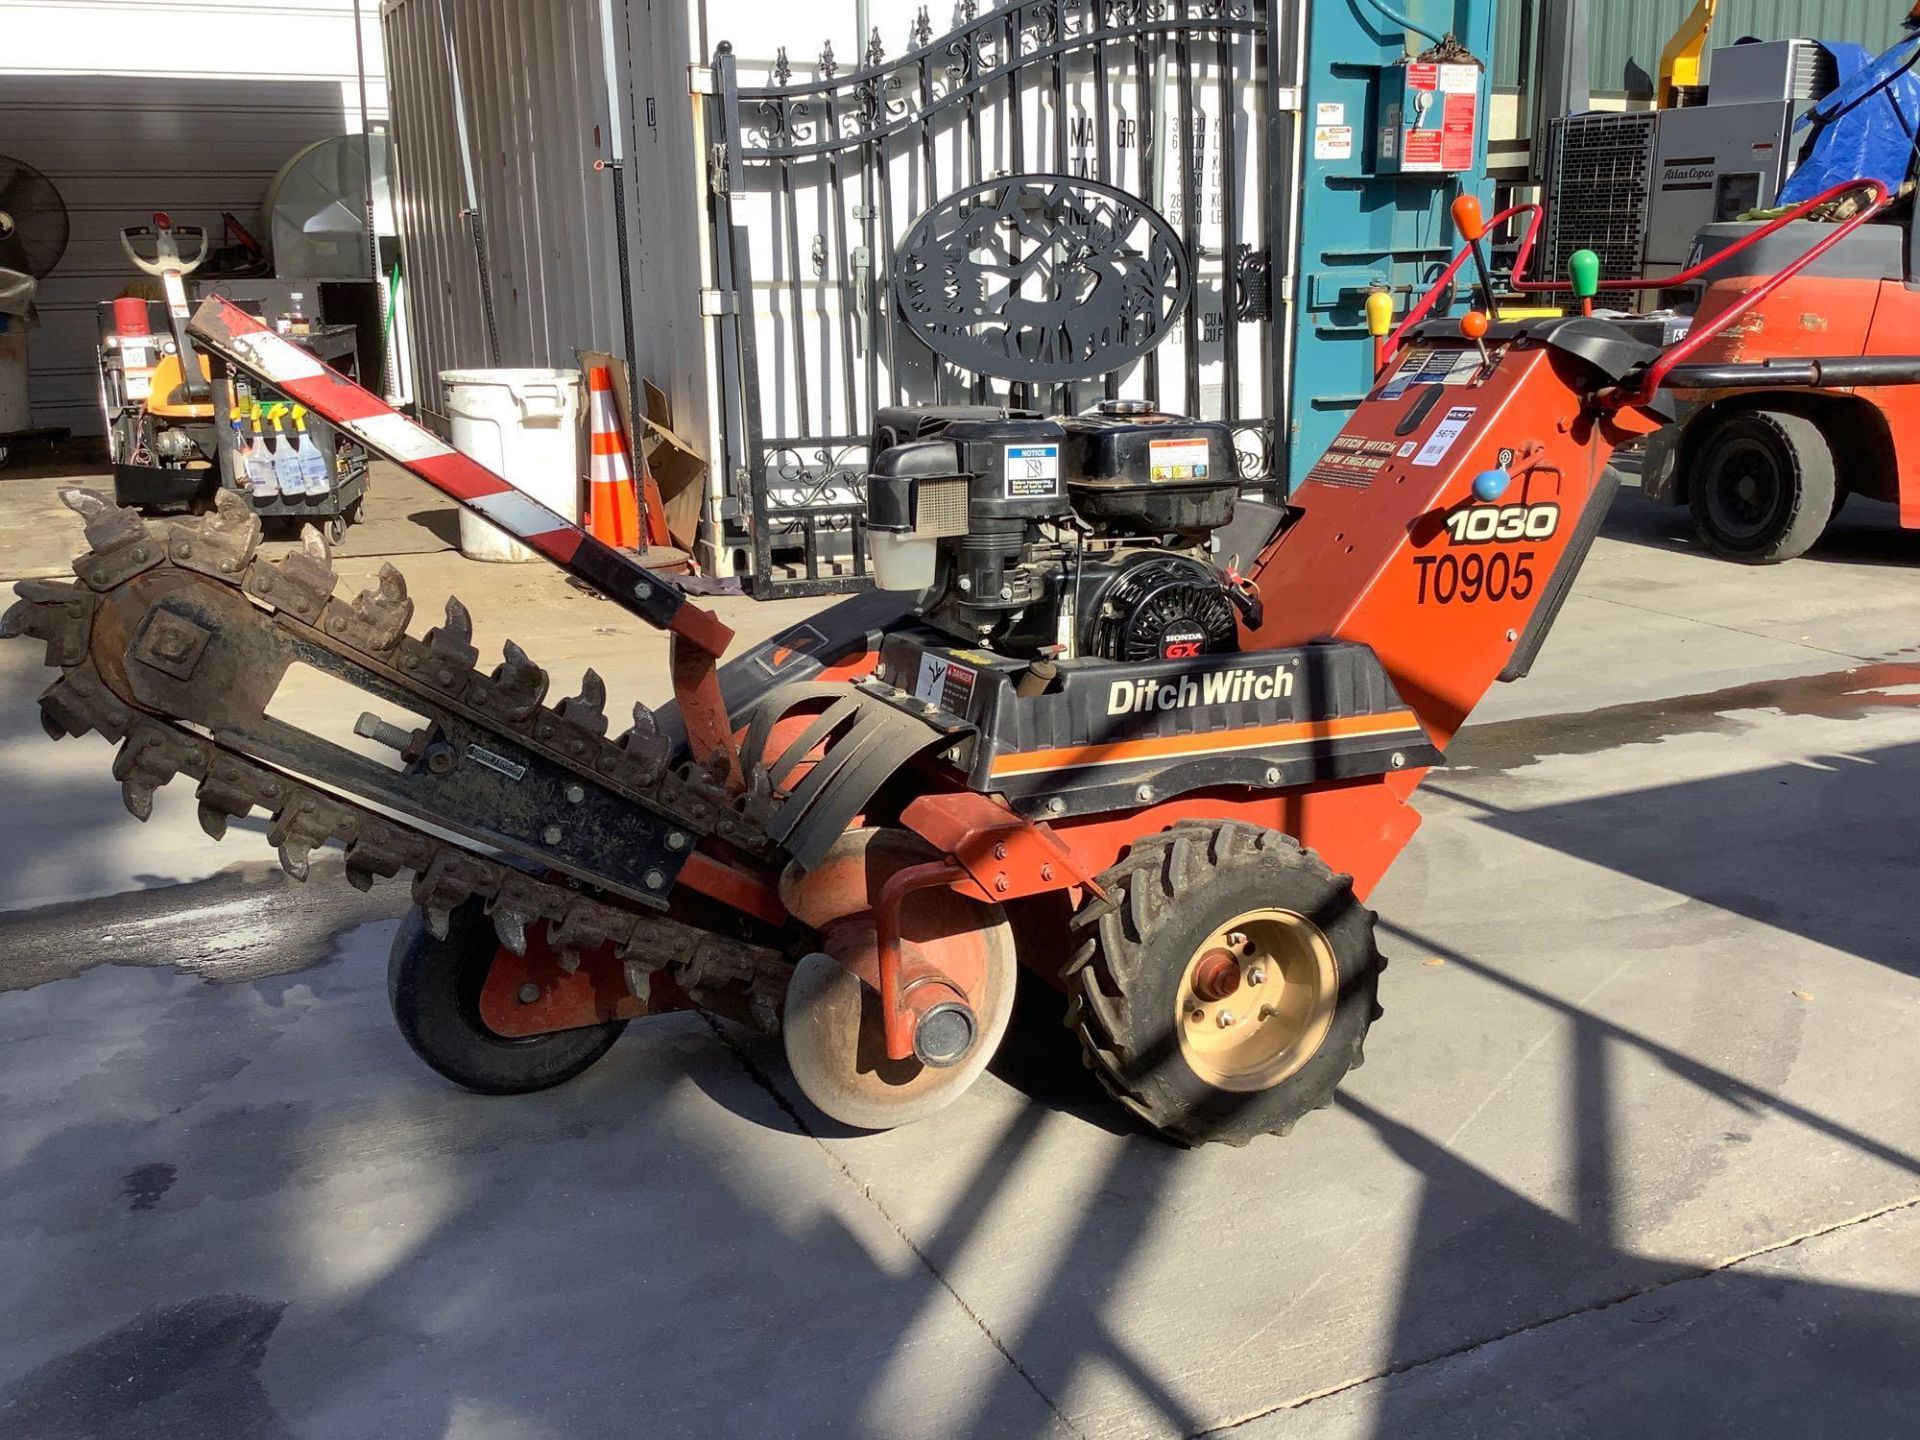 DITCH WITCH WALK BEHIND TRENCHER MODEL 1030, GAS POWERED, RUNS & OPERATES - Image 8 of 11